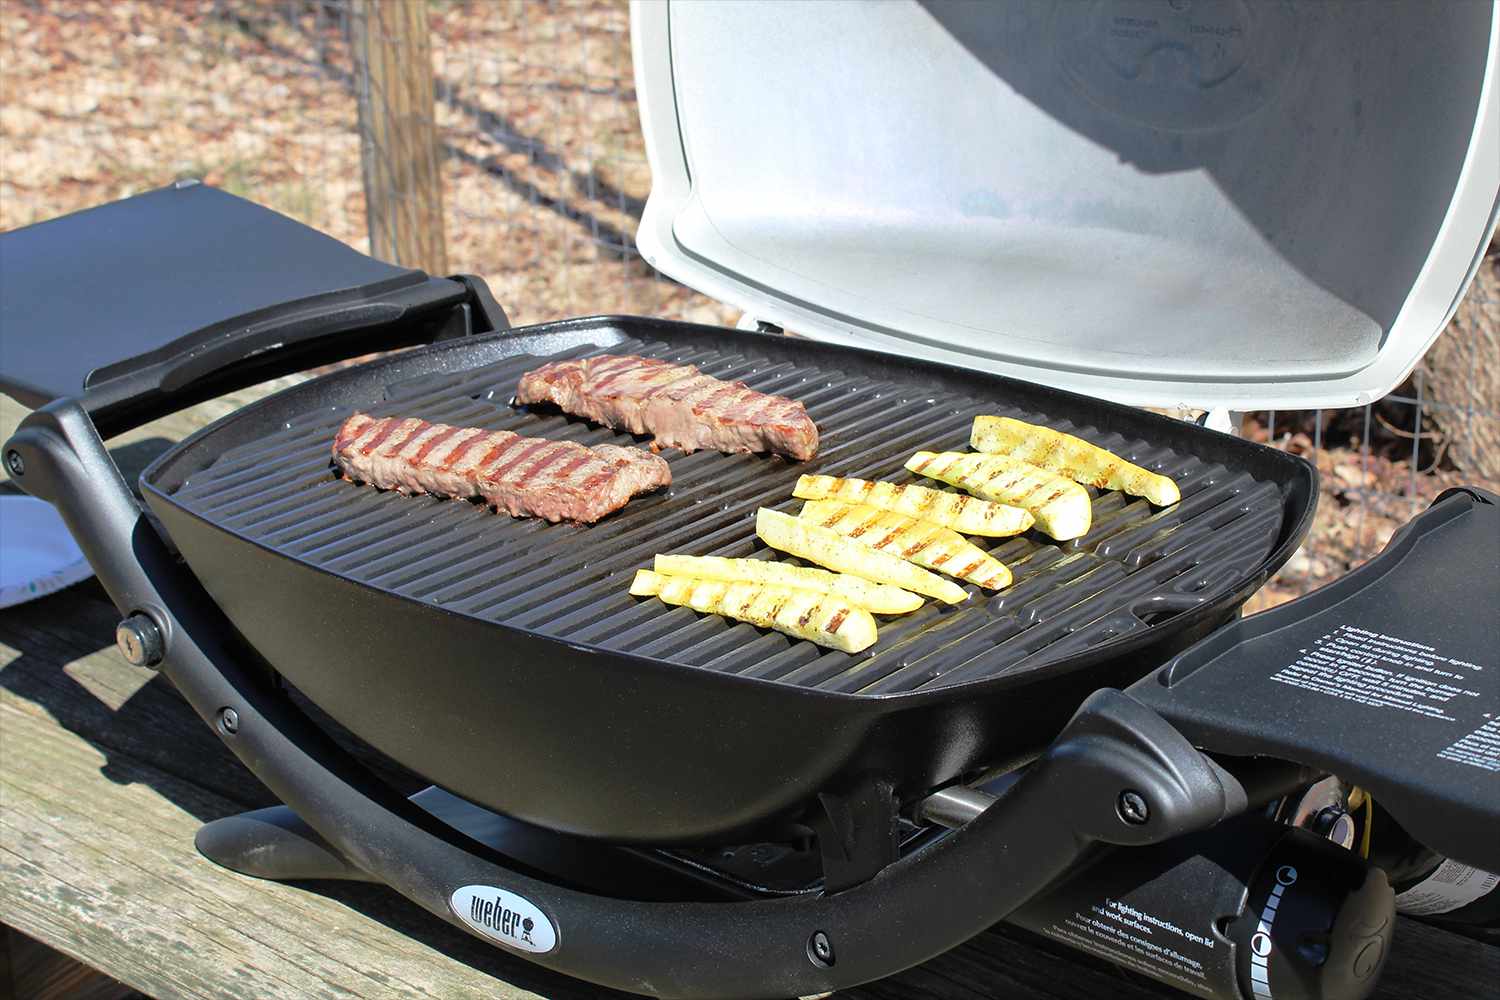 Weber Q2200 Propane Grill with steak and veggies